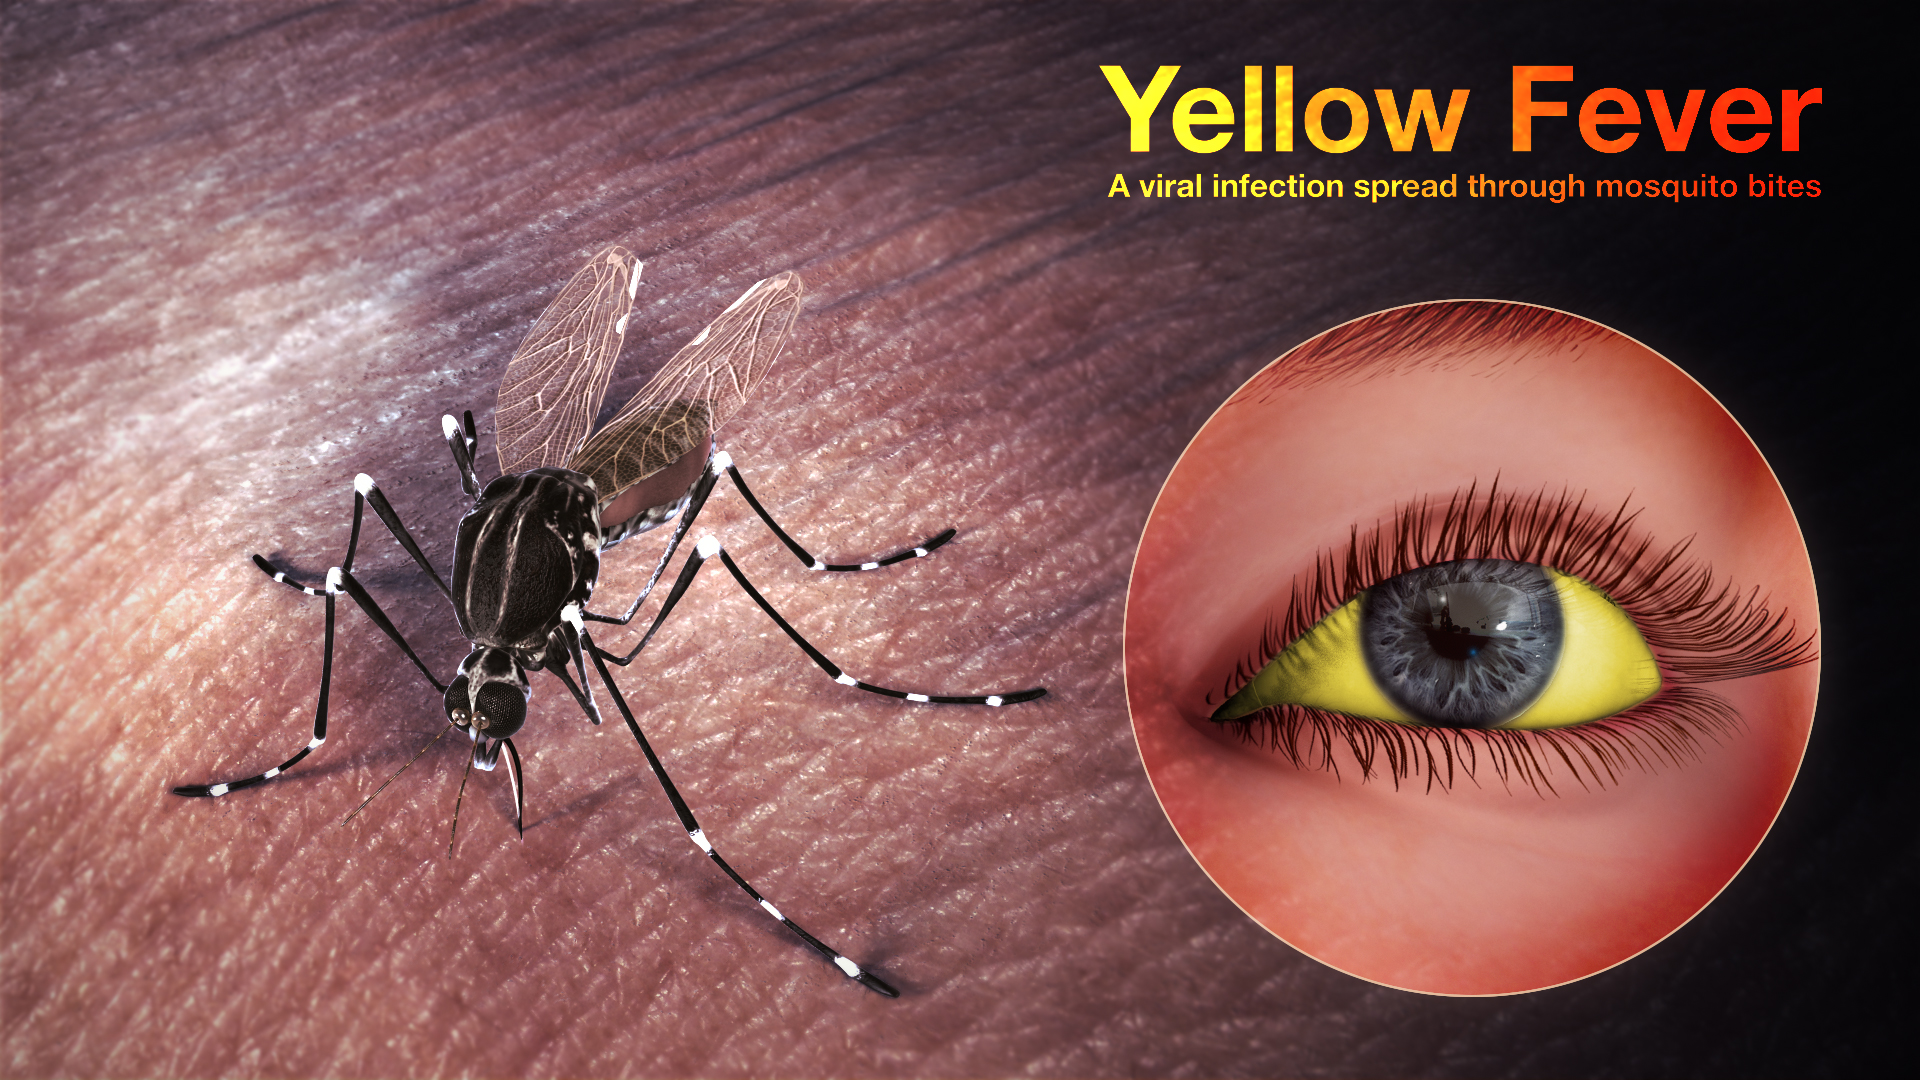 Treatment for Yellow Fever